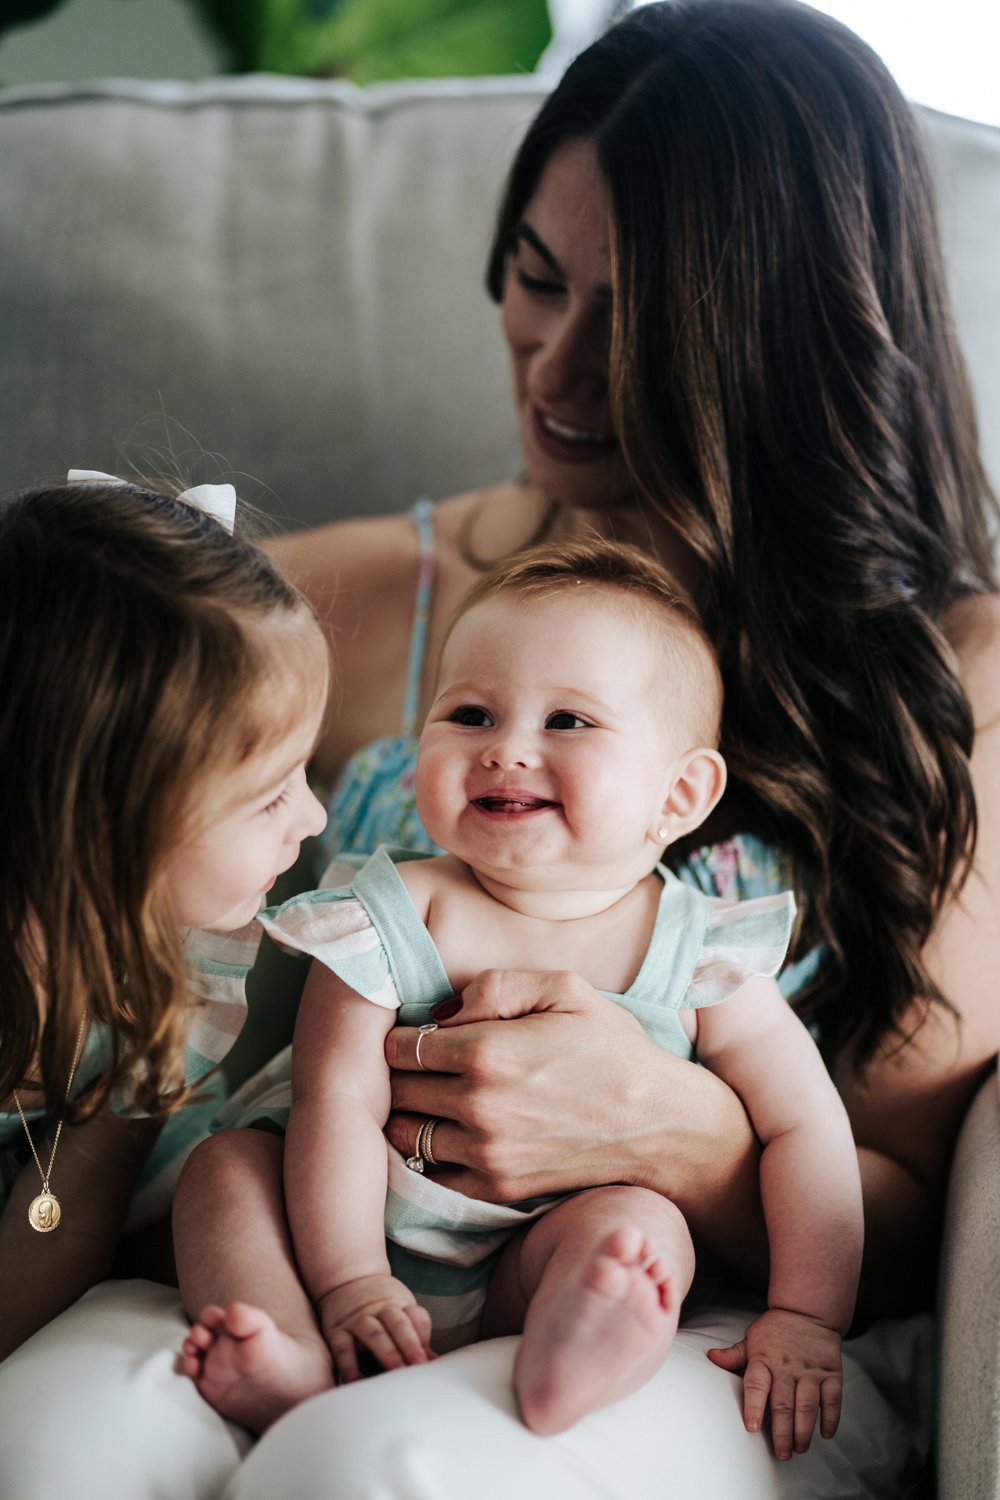 Baby smiles as it poses with sister and mother during family shoot